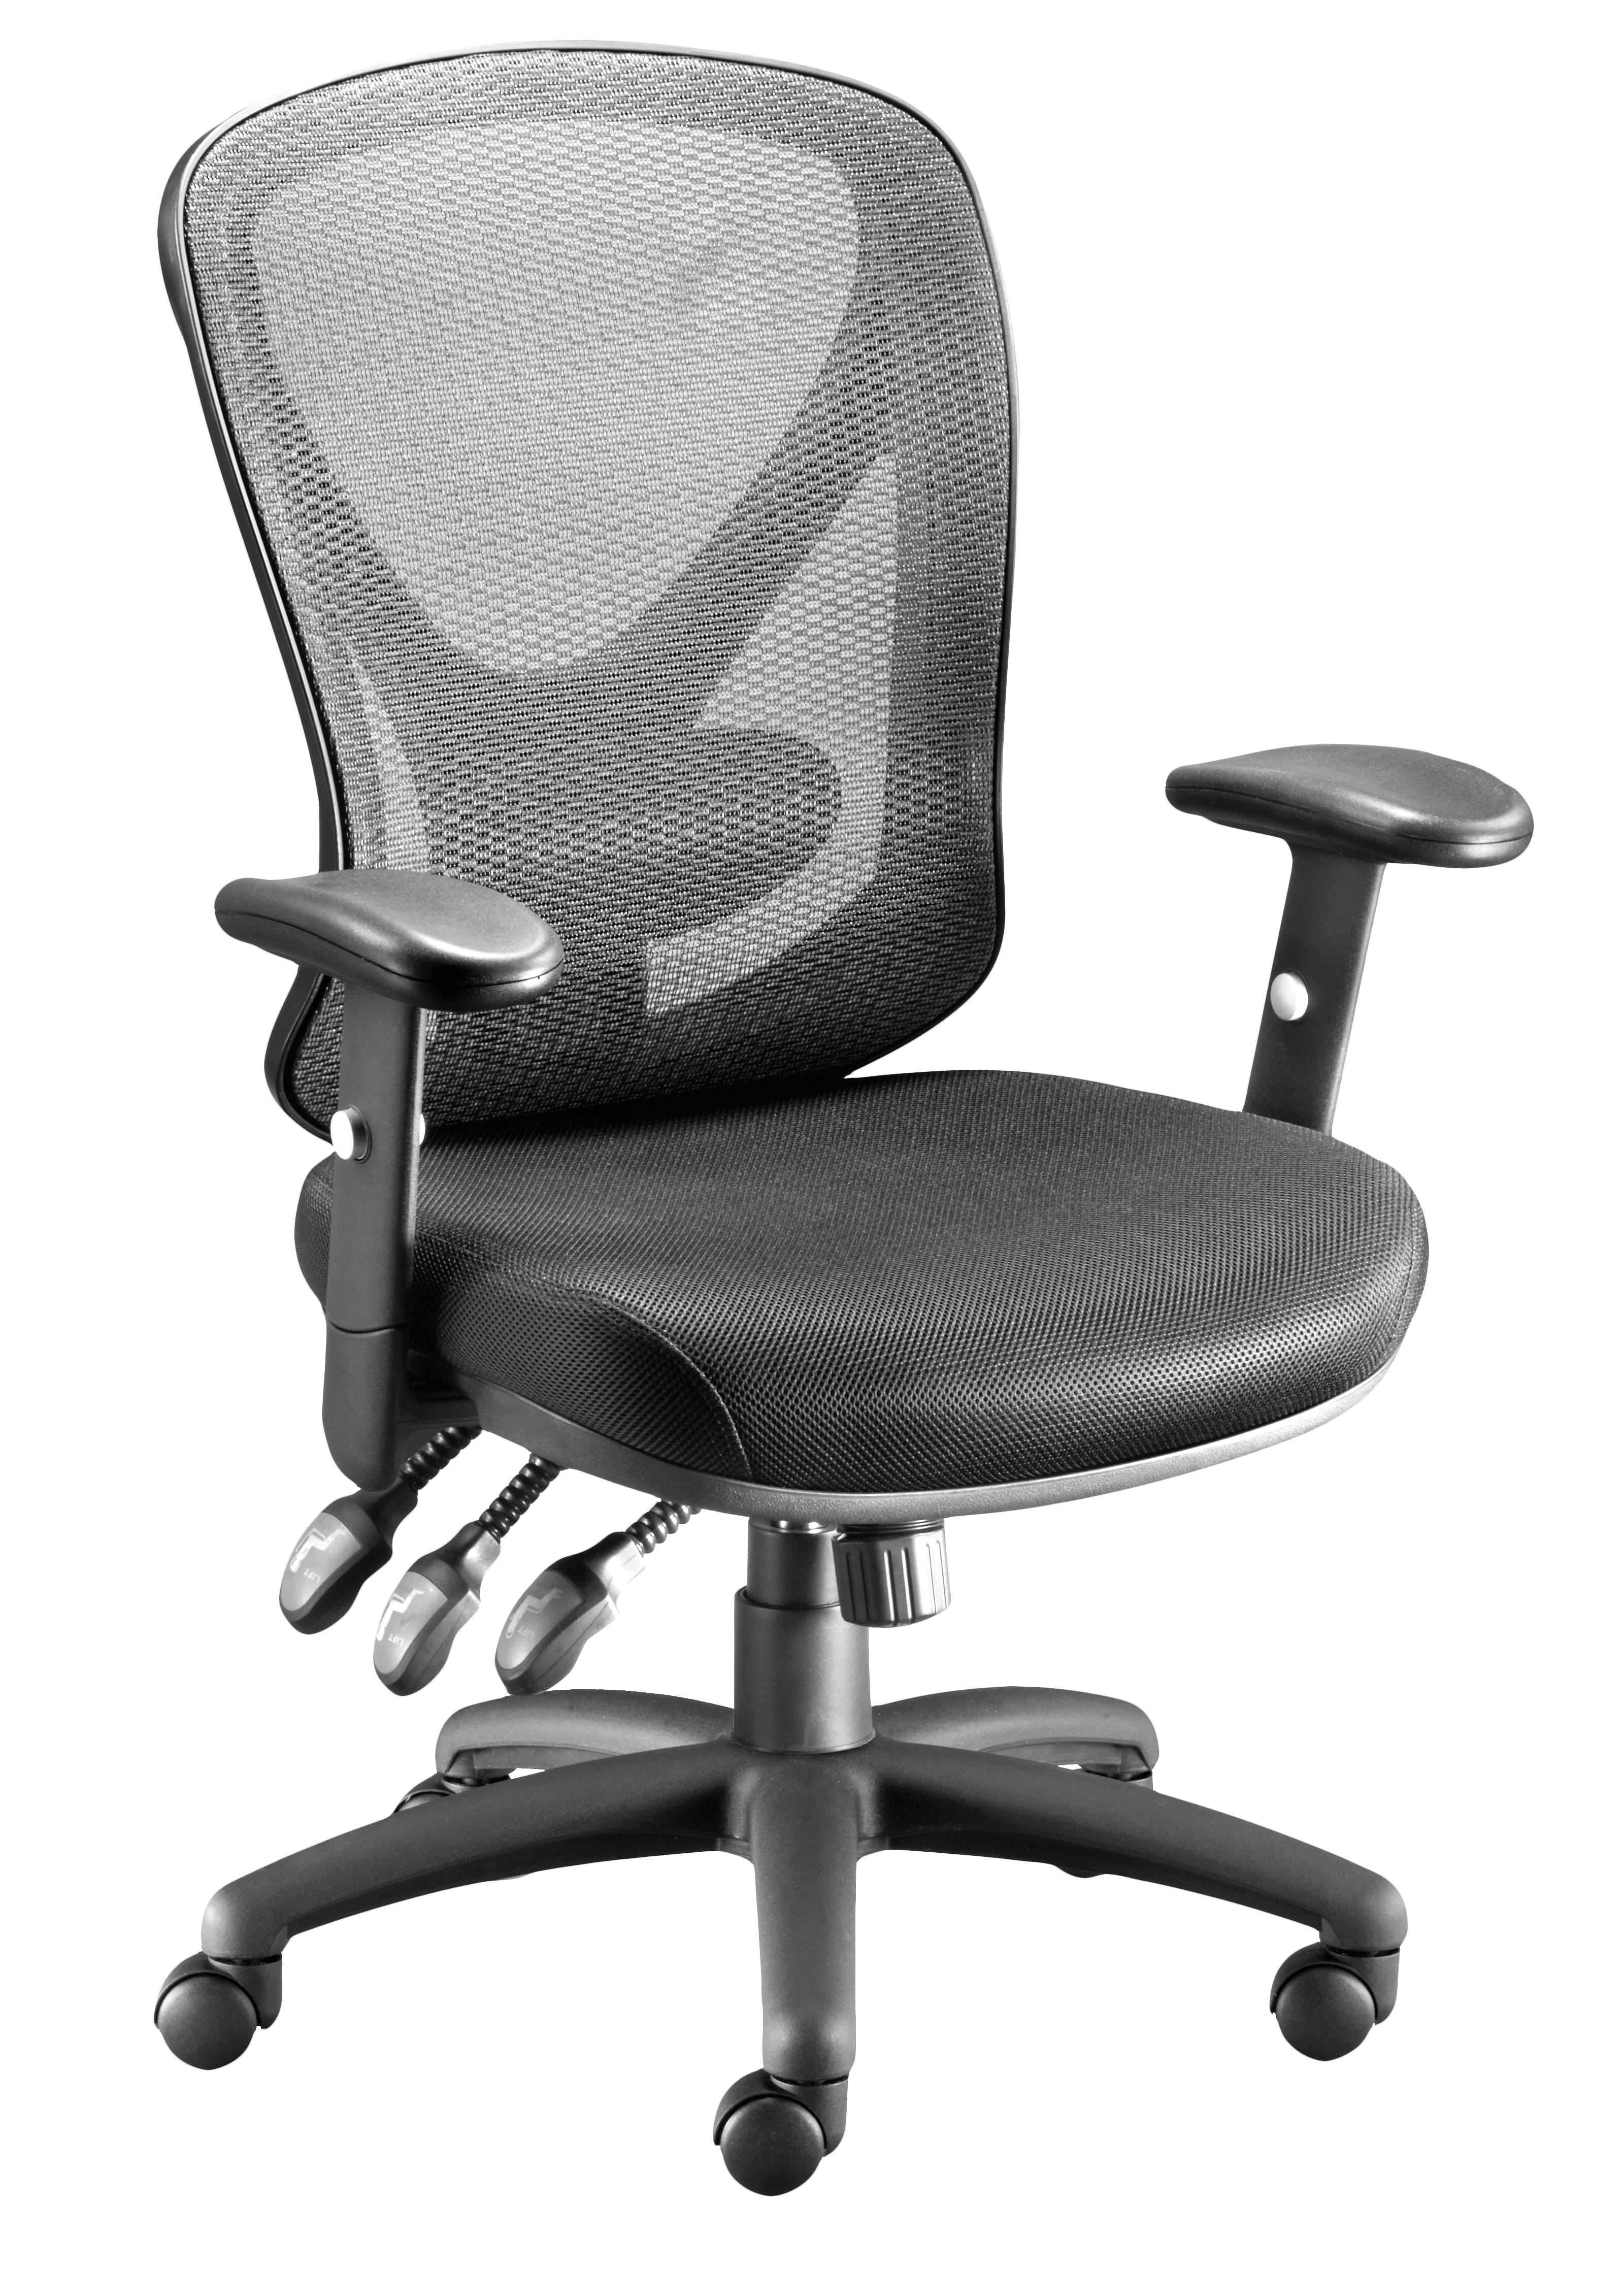 Comfortable Seating in the Office with the Office Chairs